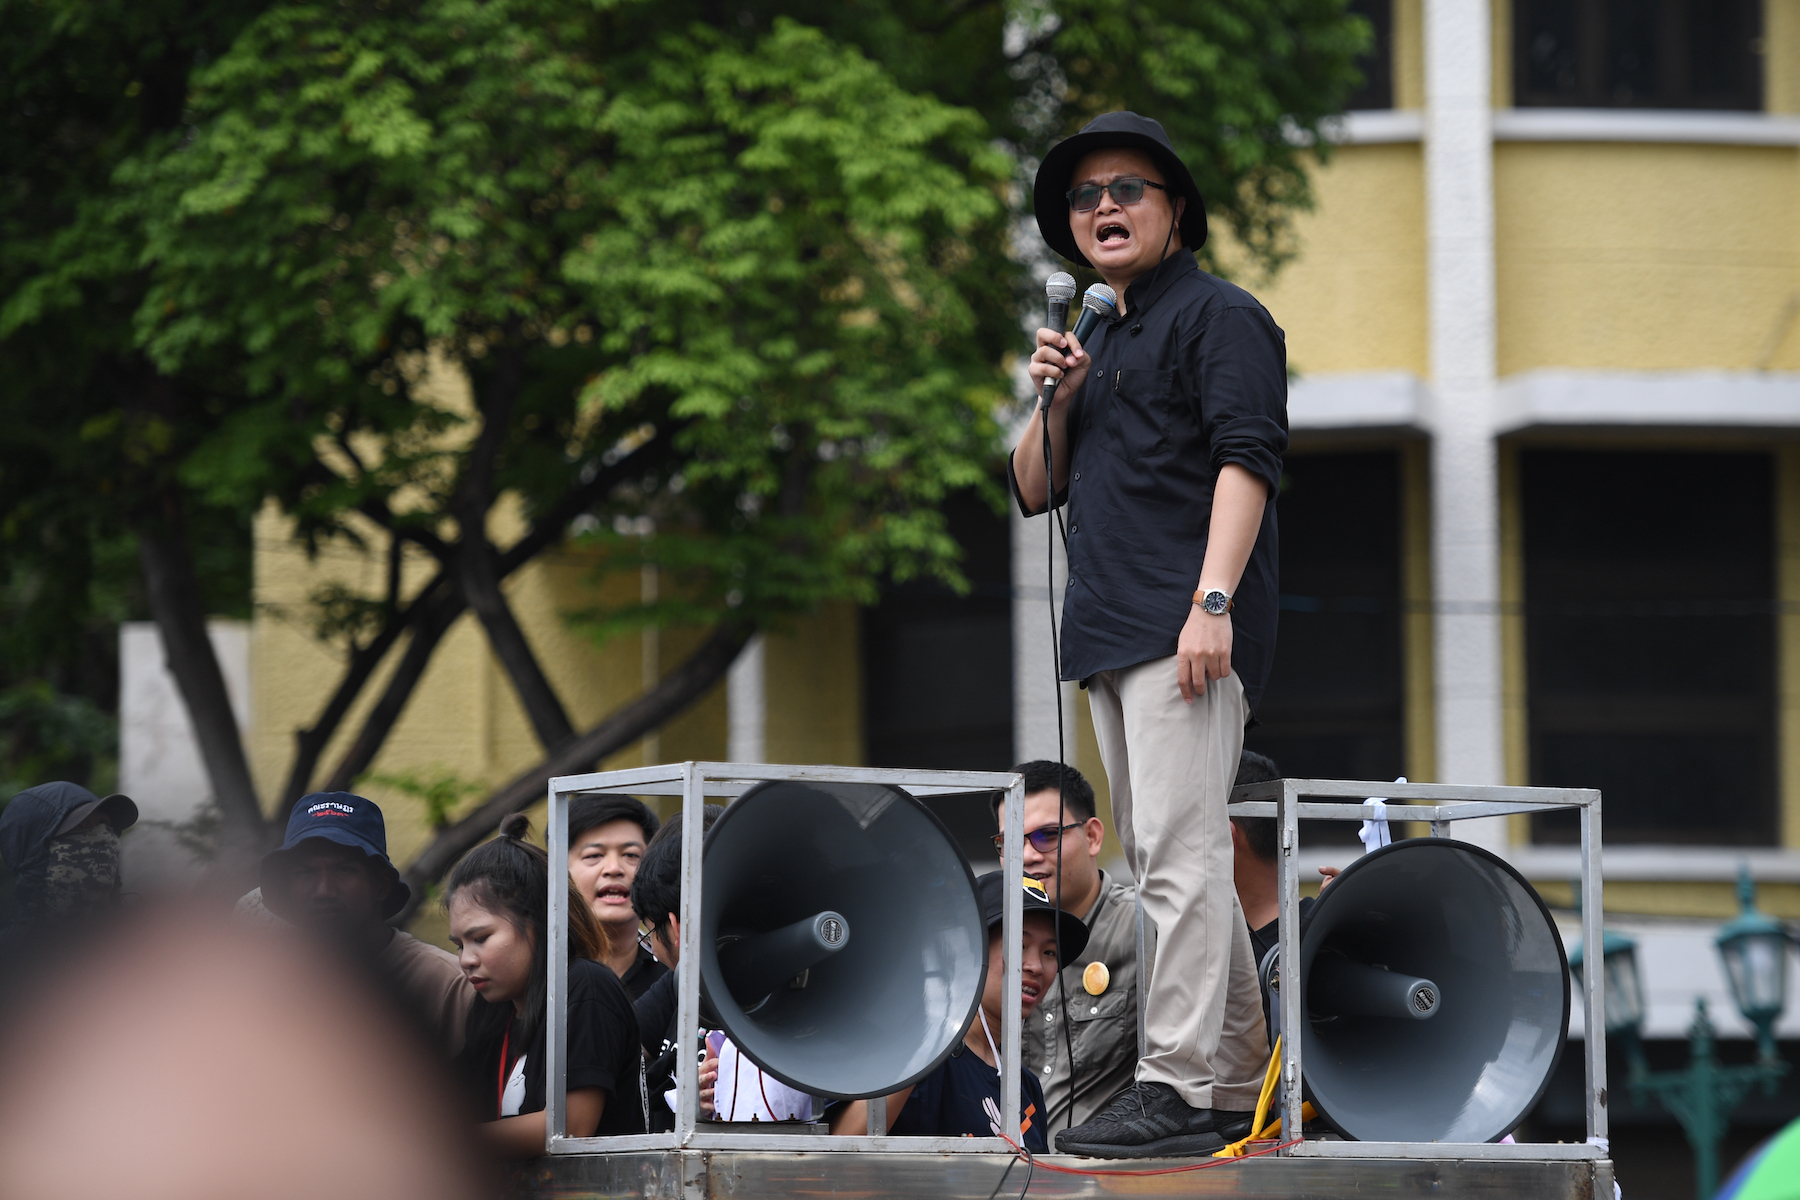 This Thai Activist And Lawyer Has Been Jailed For Four Years For Criticizing The Monarchy